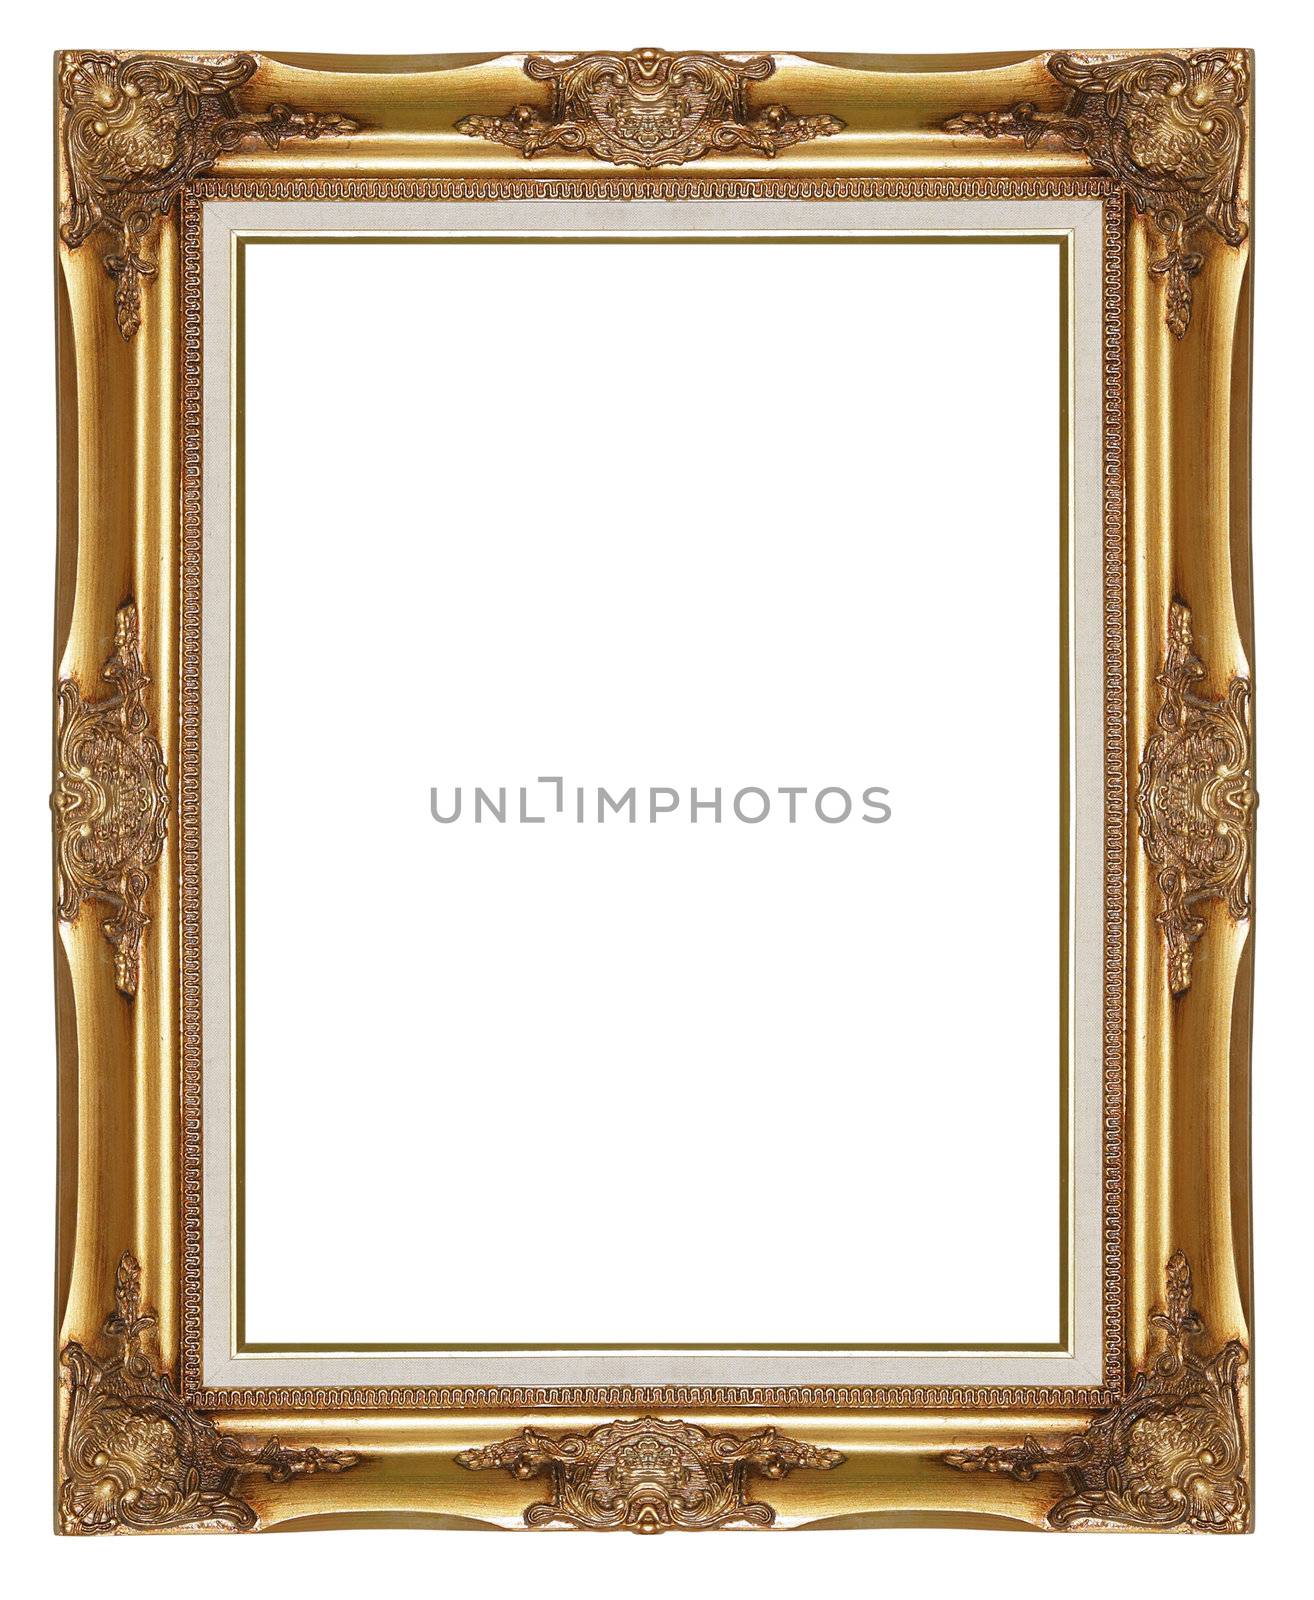 picture frame isolated on white







photo frame isolated on white background